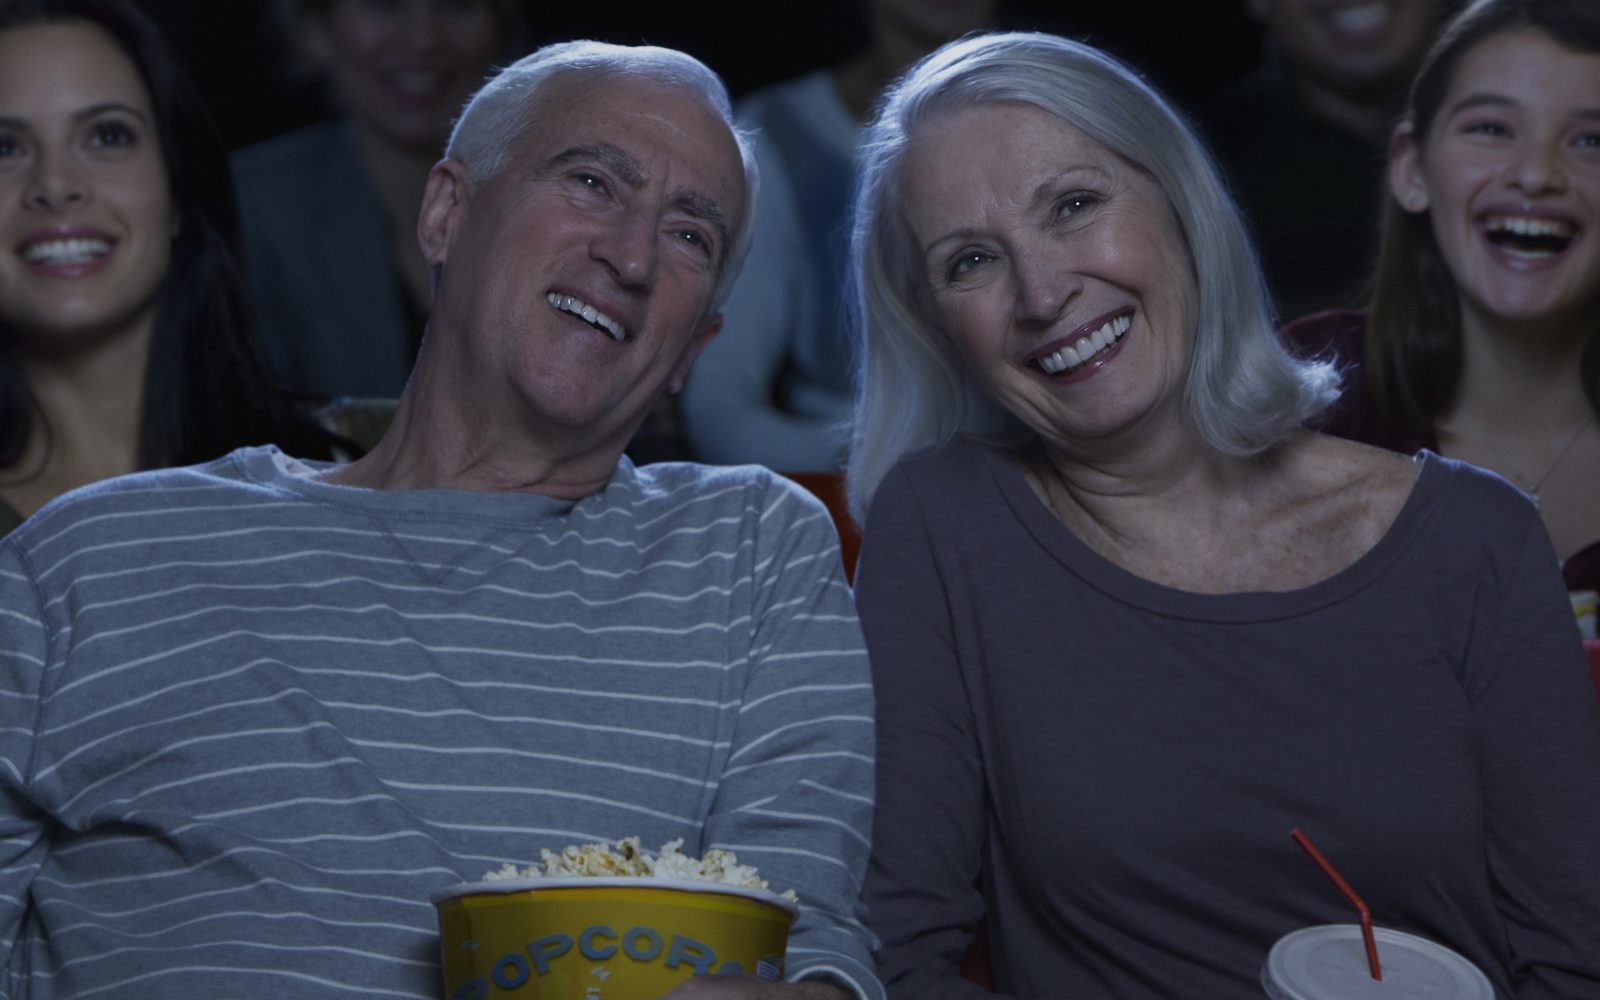 You got: Baby Boomer! 🍿 Plan a Movie Marathon Night and We’ll Guess What Generation You Were Born to